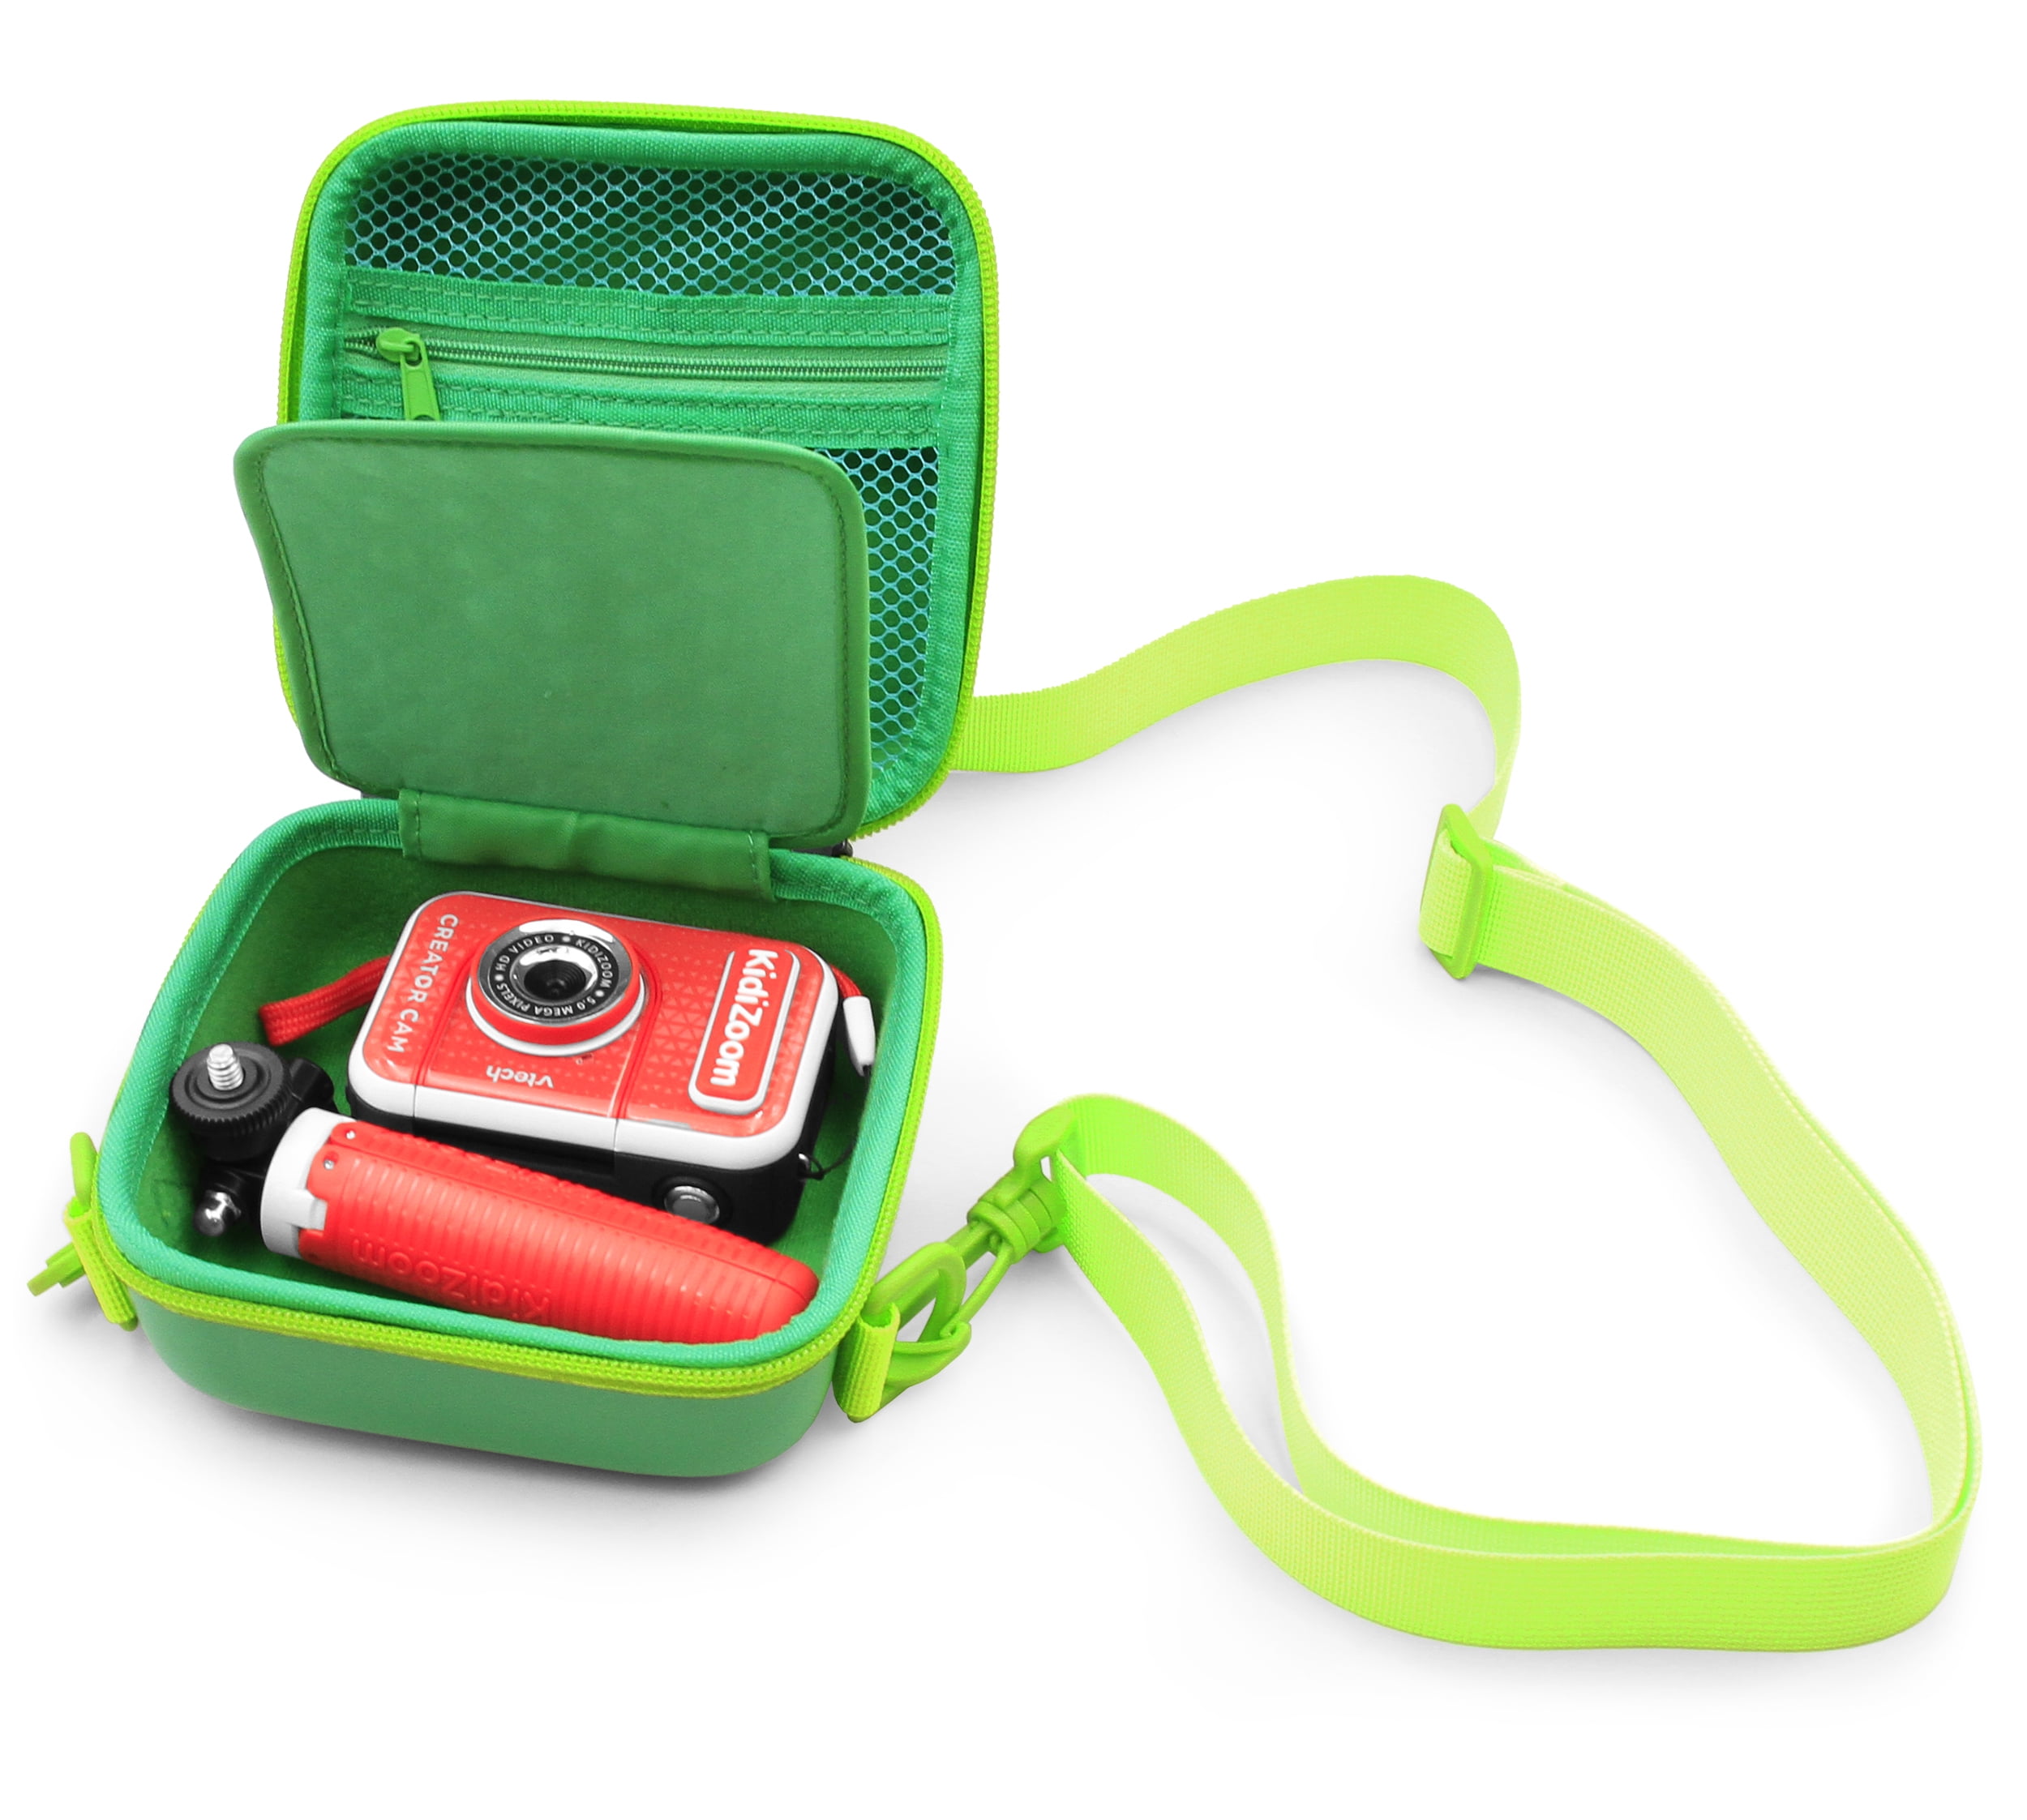 VTech Kidizoom Action Waterproof Camera In Hardshell Zippered Case 